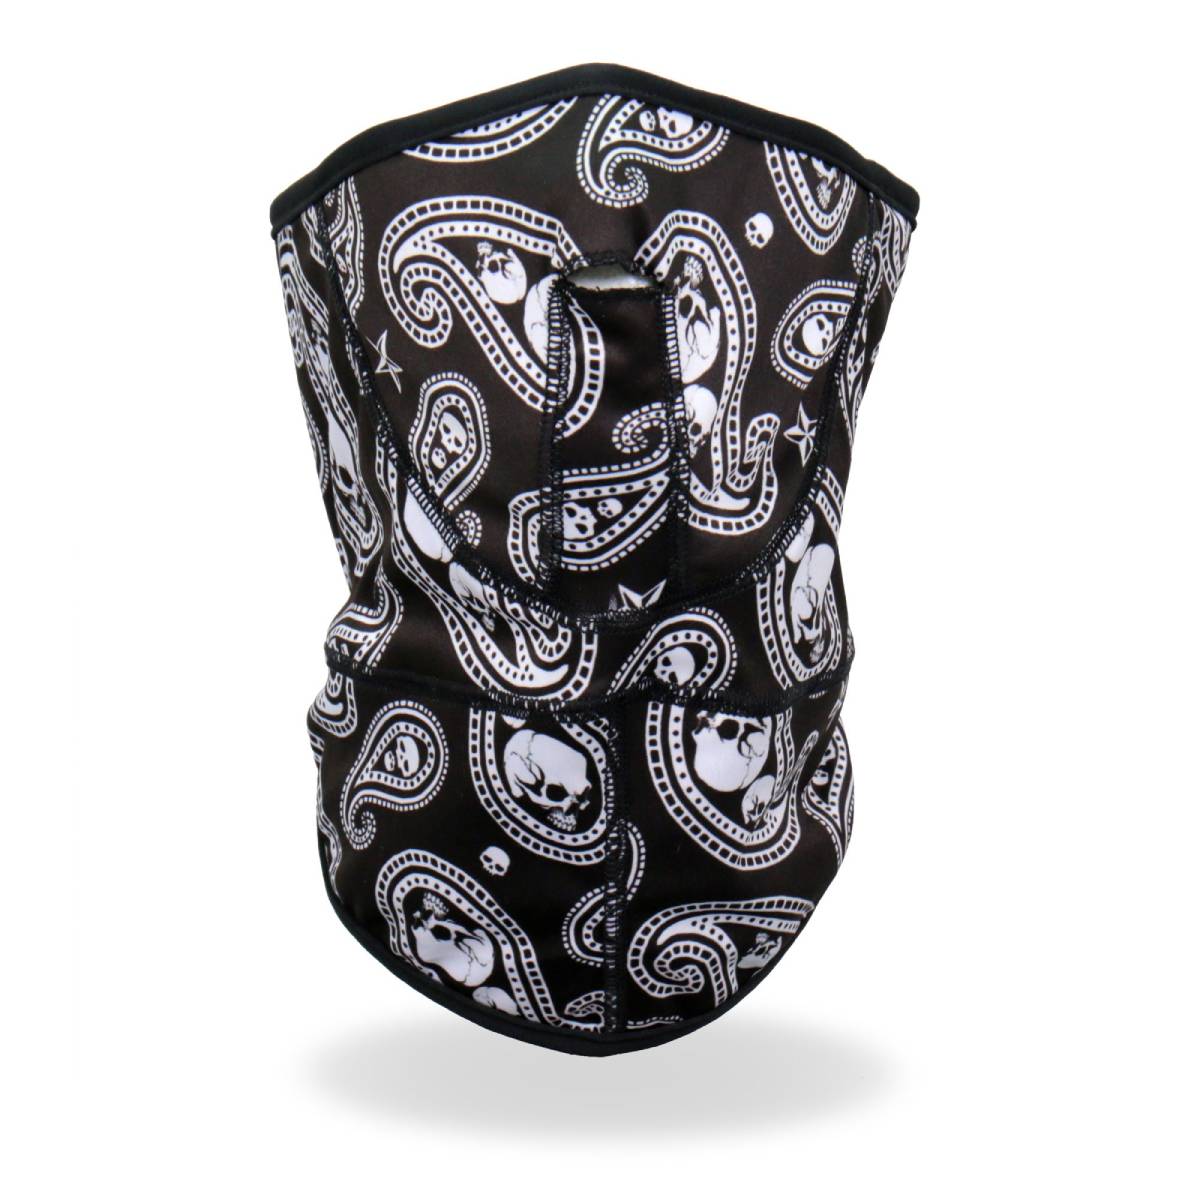 Hot Leathers FWC2005 Paisley Skull Face Wrap Neck Warmer